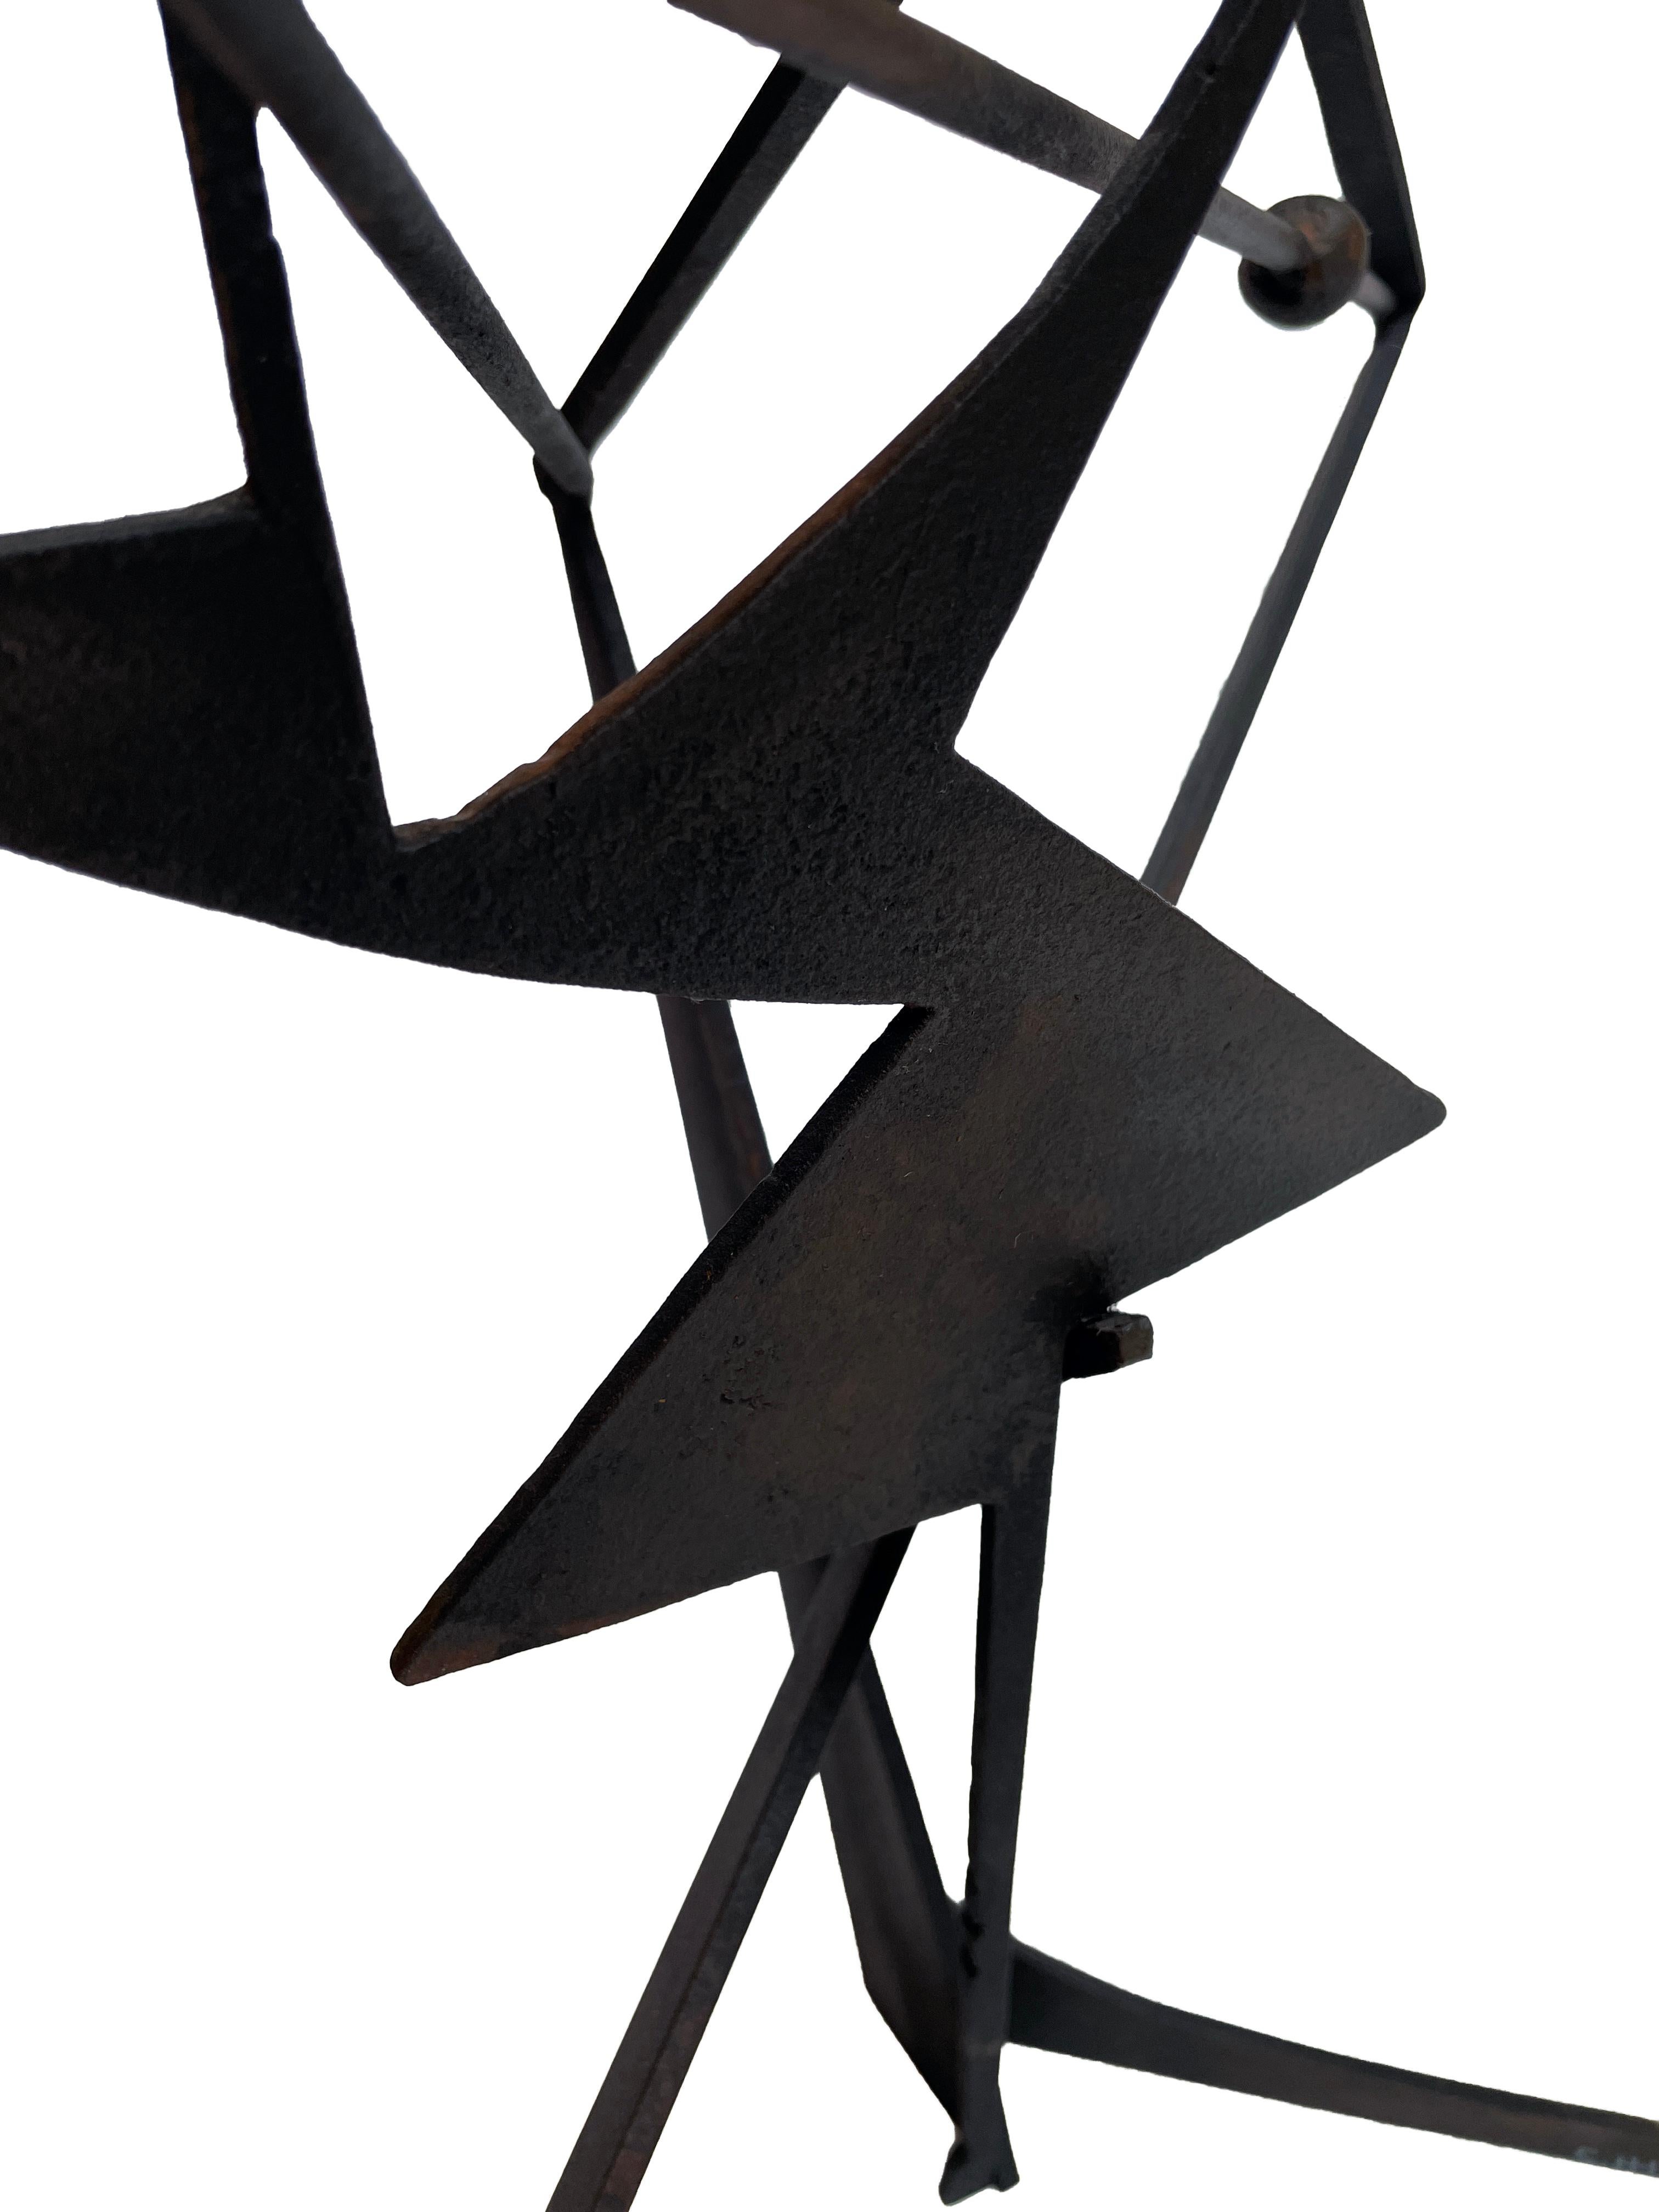 The Shortest Distance - Abstract Geometric Form, Welded Steel Sculpture  5